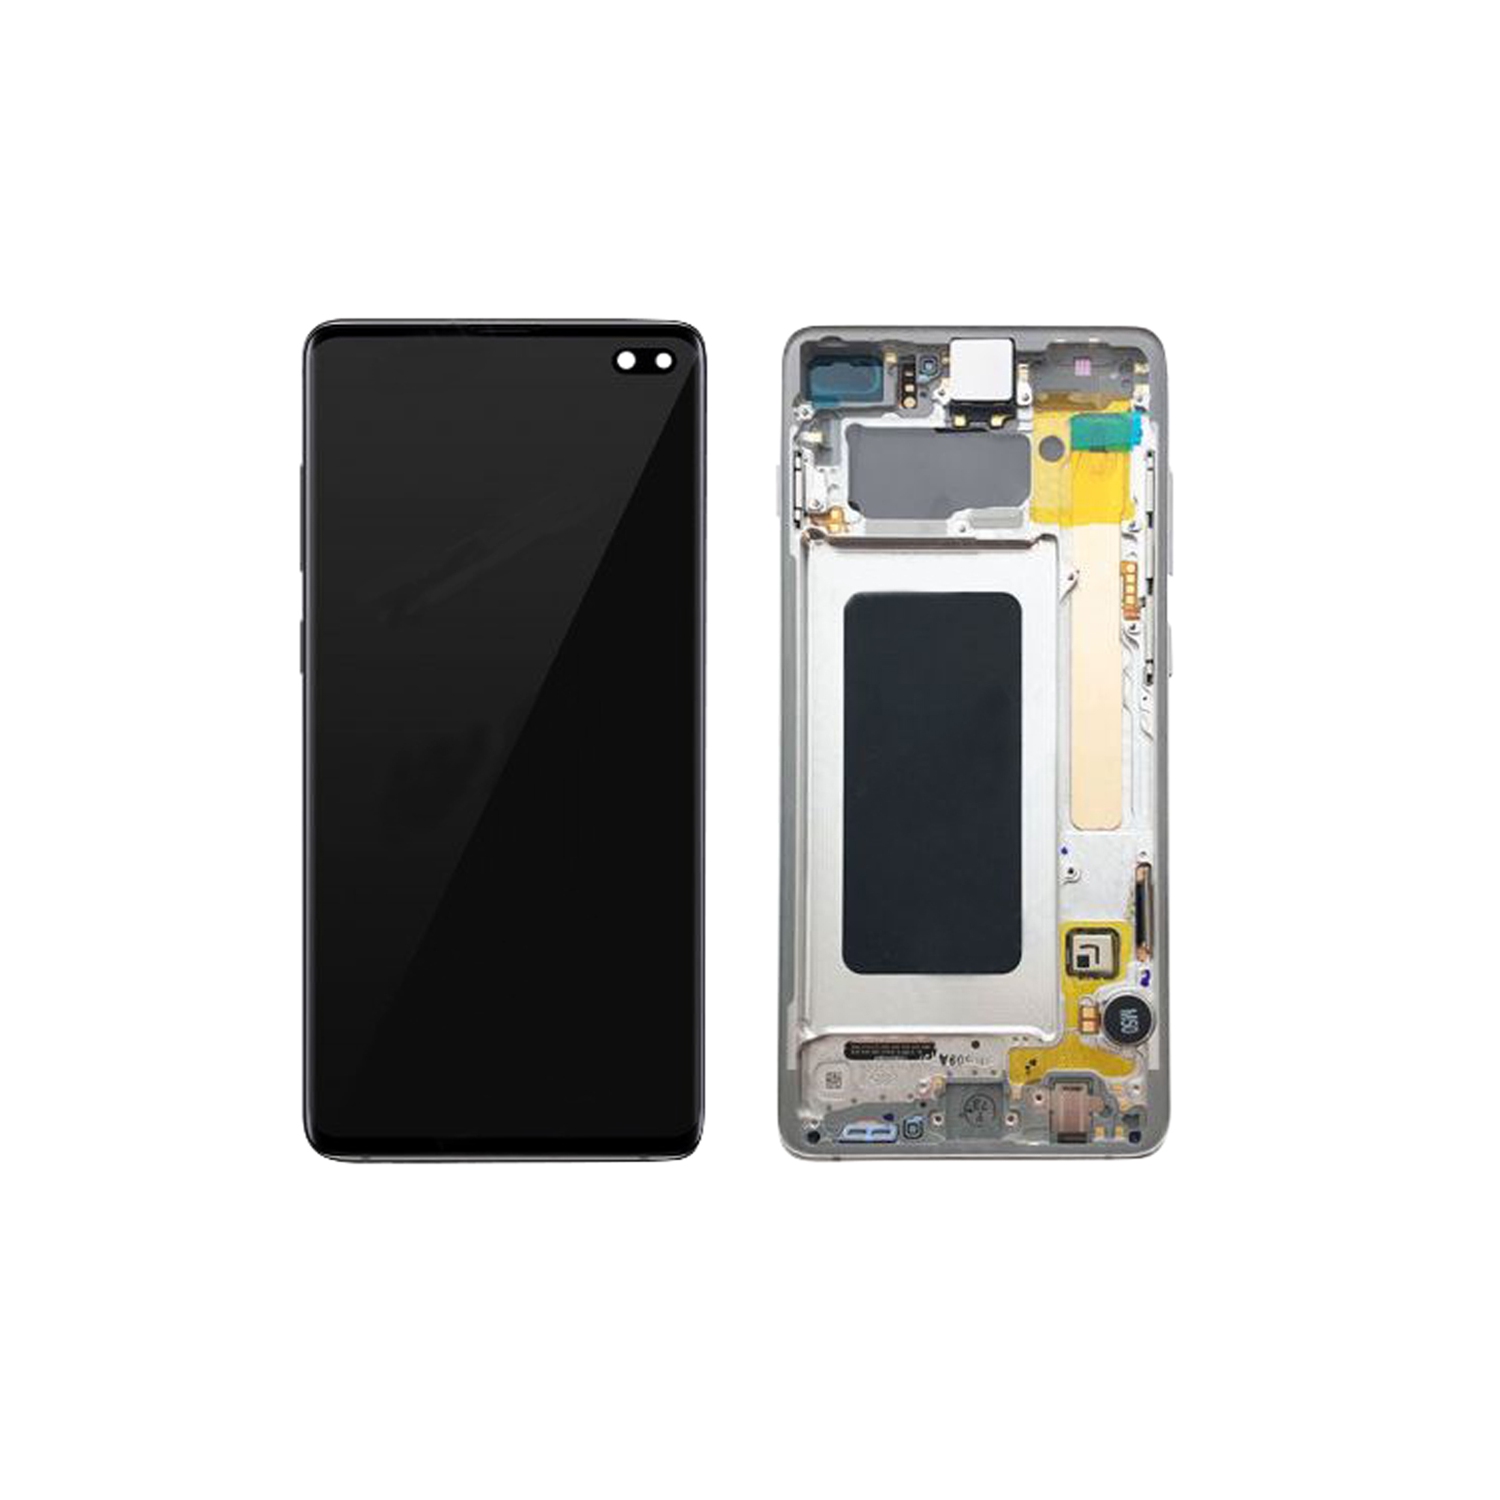 Replacement OLED Display Touch Screen Digitizer Assembly With Frame For Samsung Galaxy S10 Plus SM-G975W - White